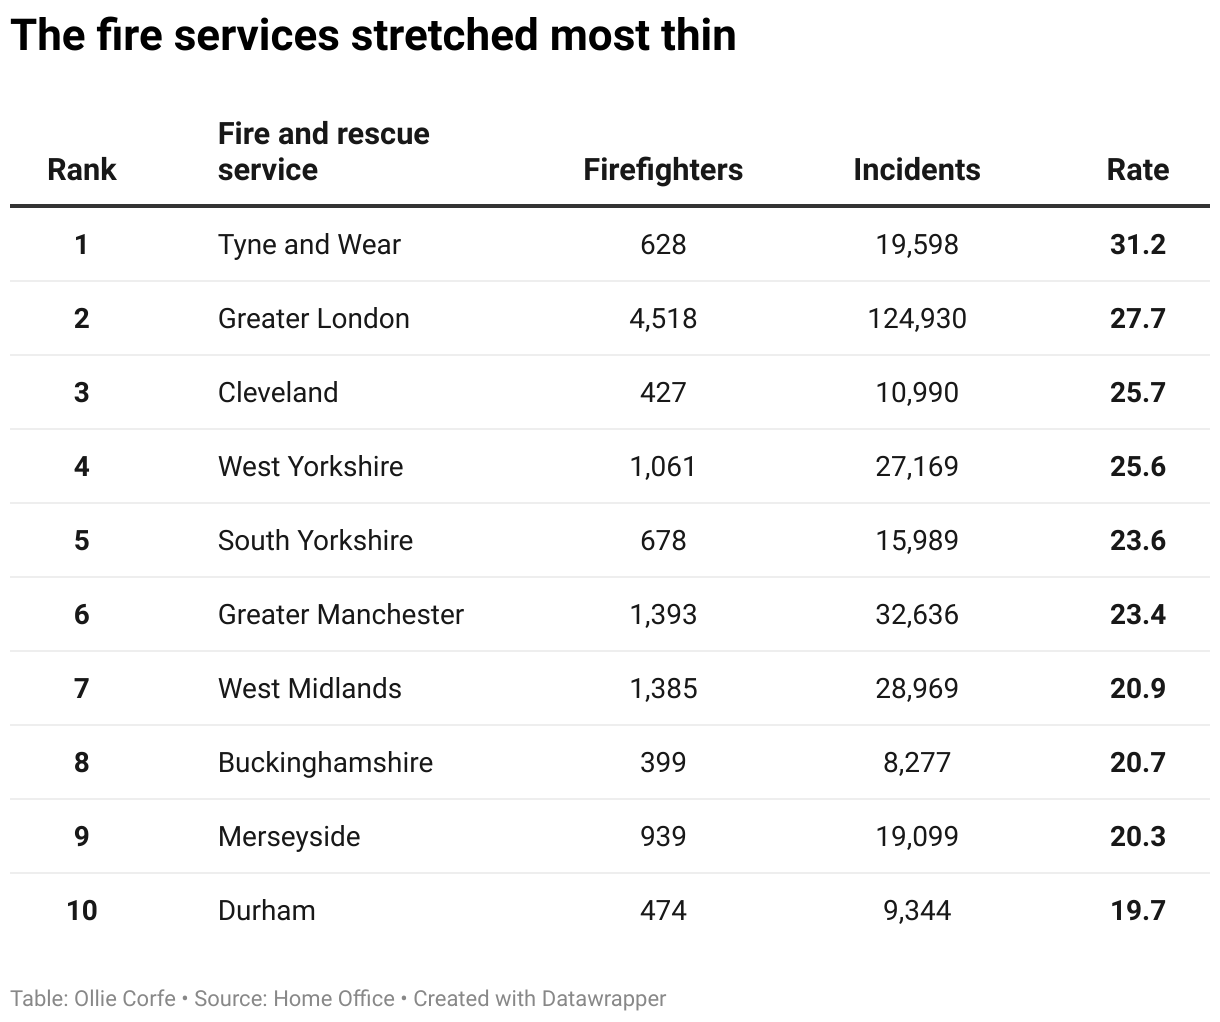 Table displaying fire services and their rate of work.